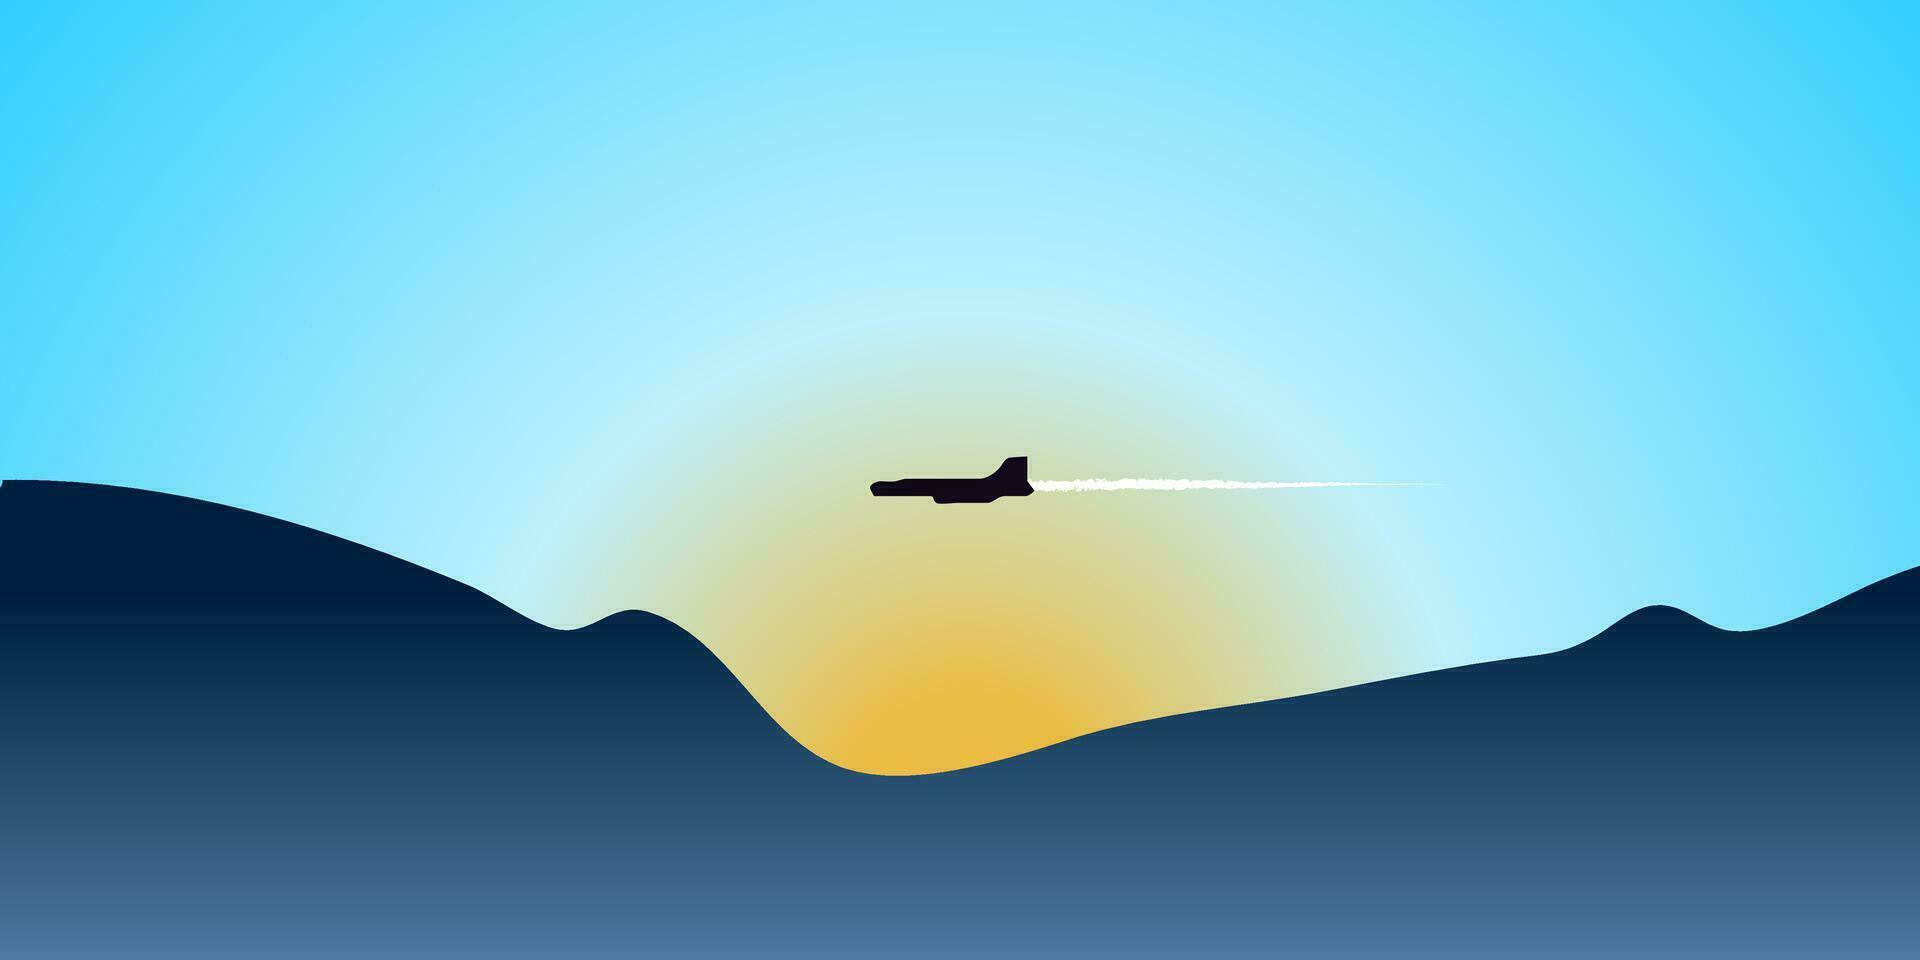 Silhouette of airplane or jet flying in the sky. Vector illustration.